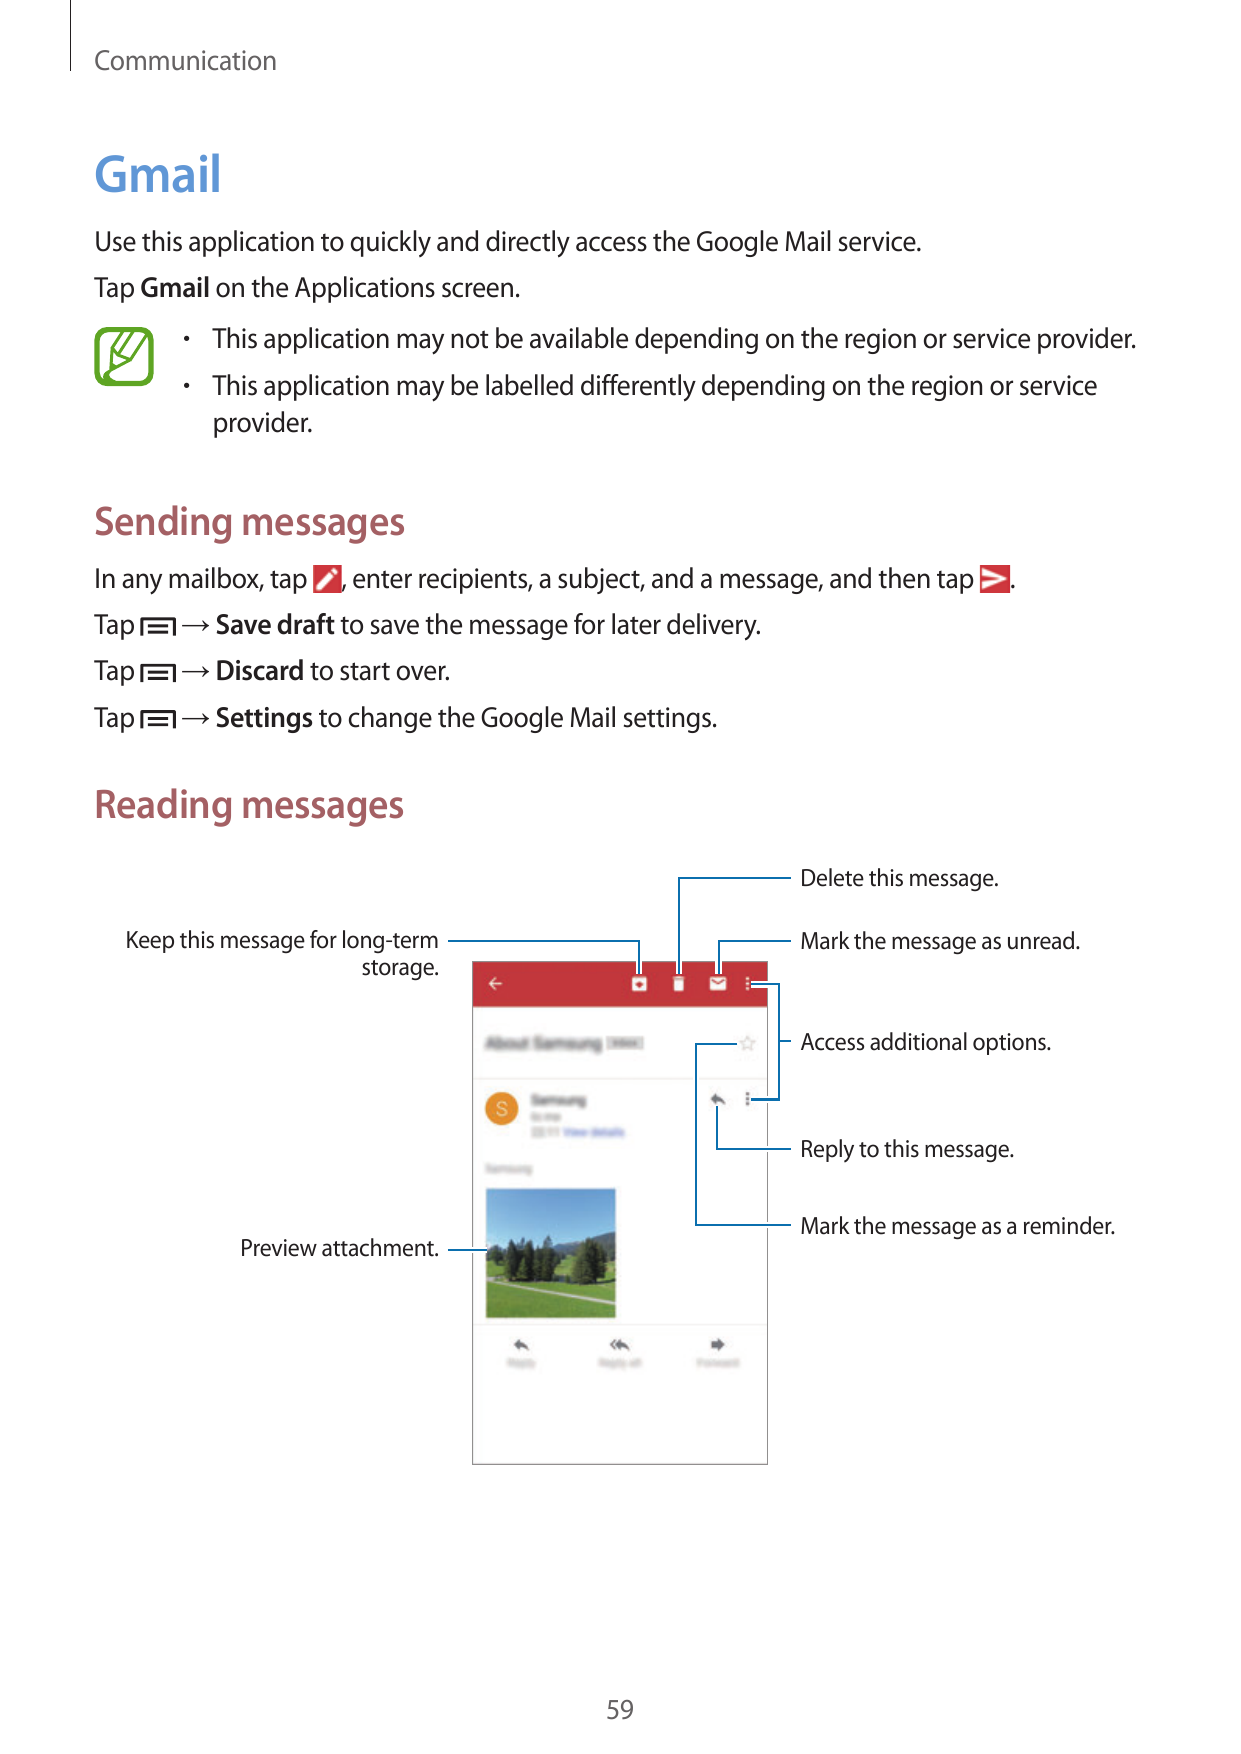 CommunicationGmailUse this application to quickly and directly access the Google Mail service.Tap Gmail on the Applications scre